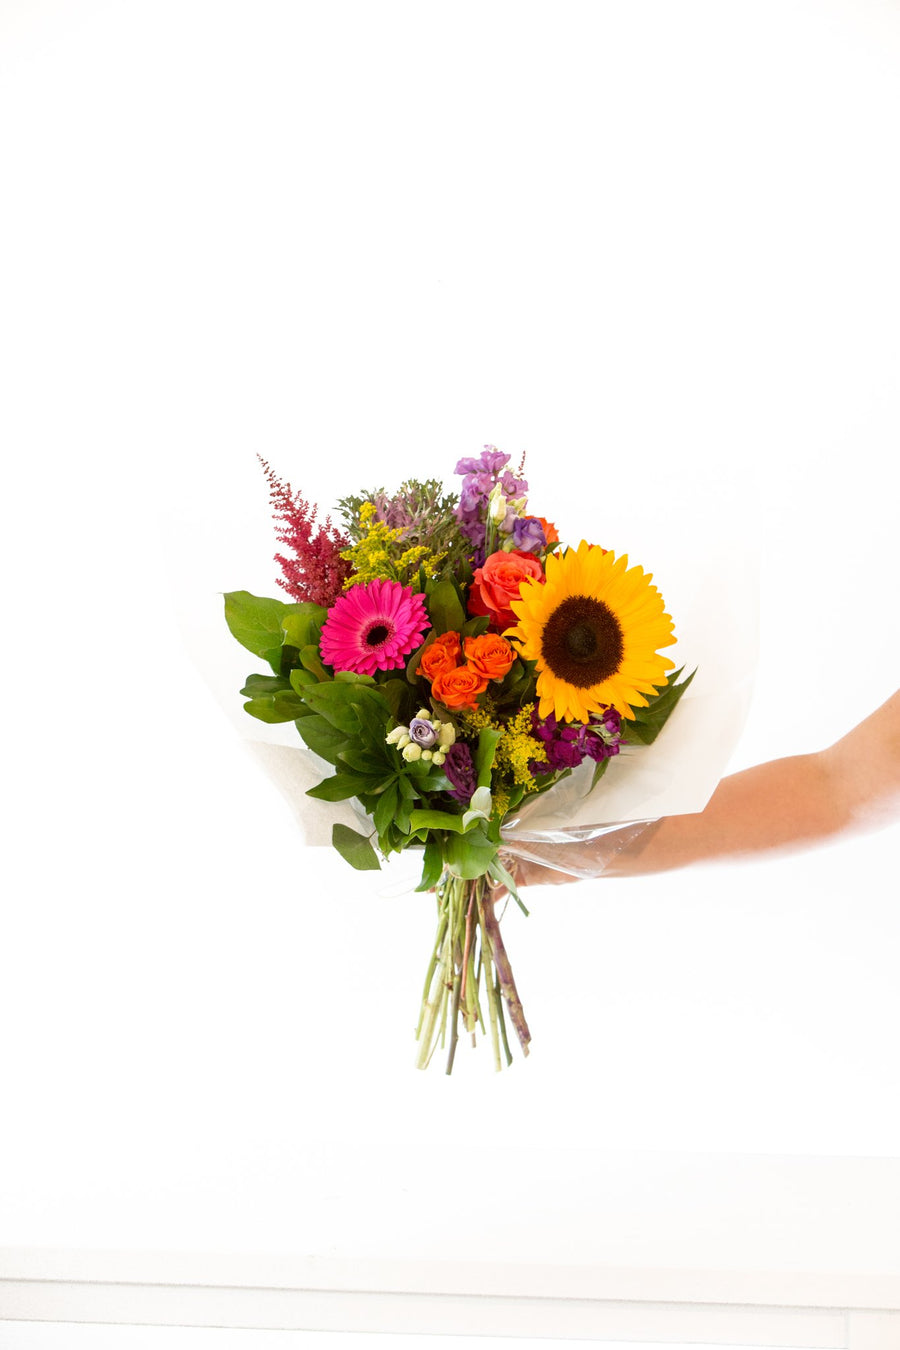 Floral Subscription Bright and Colorful hand tied bouquet - small $50